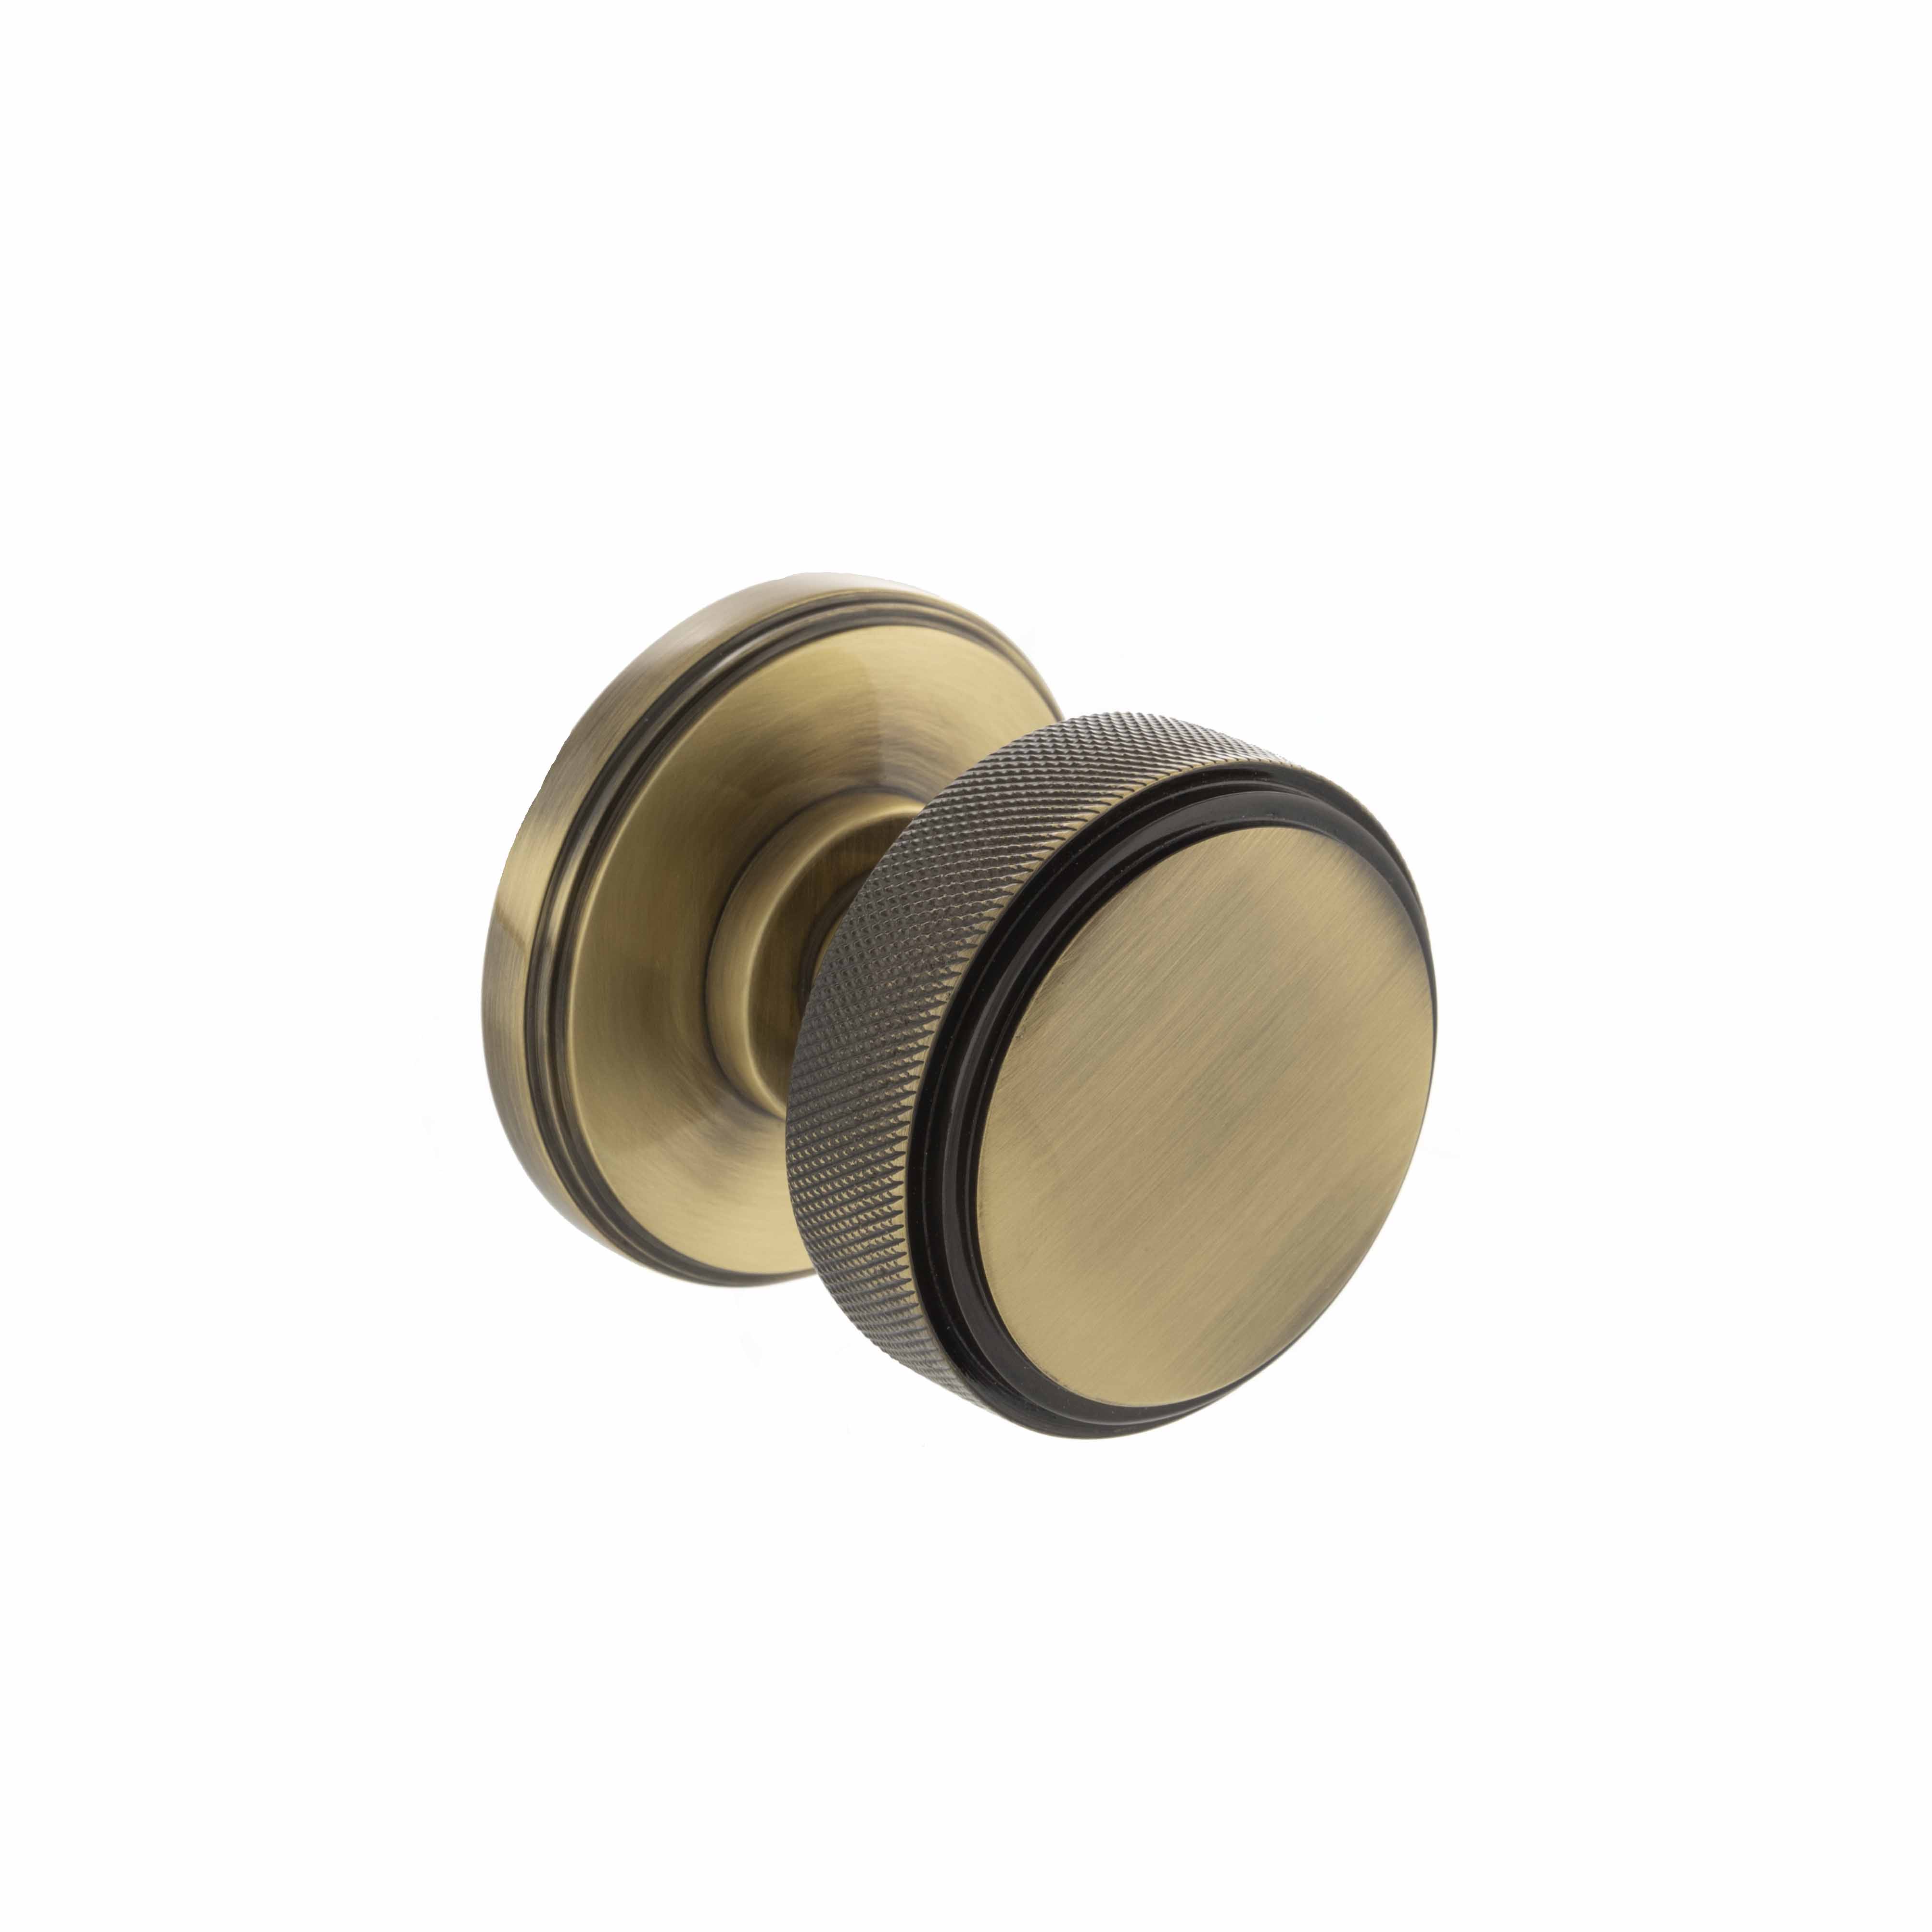 Millhouse Brass Harrison Solid Brass Knurled Mortice Knob on Concealed Fix Rose - Antique Brass